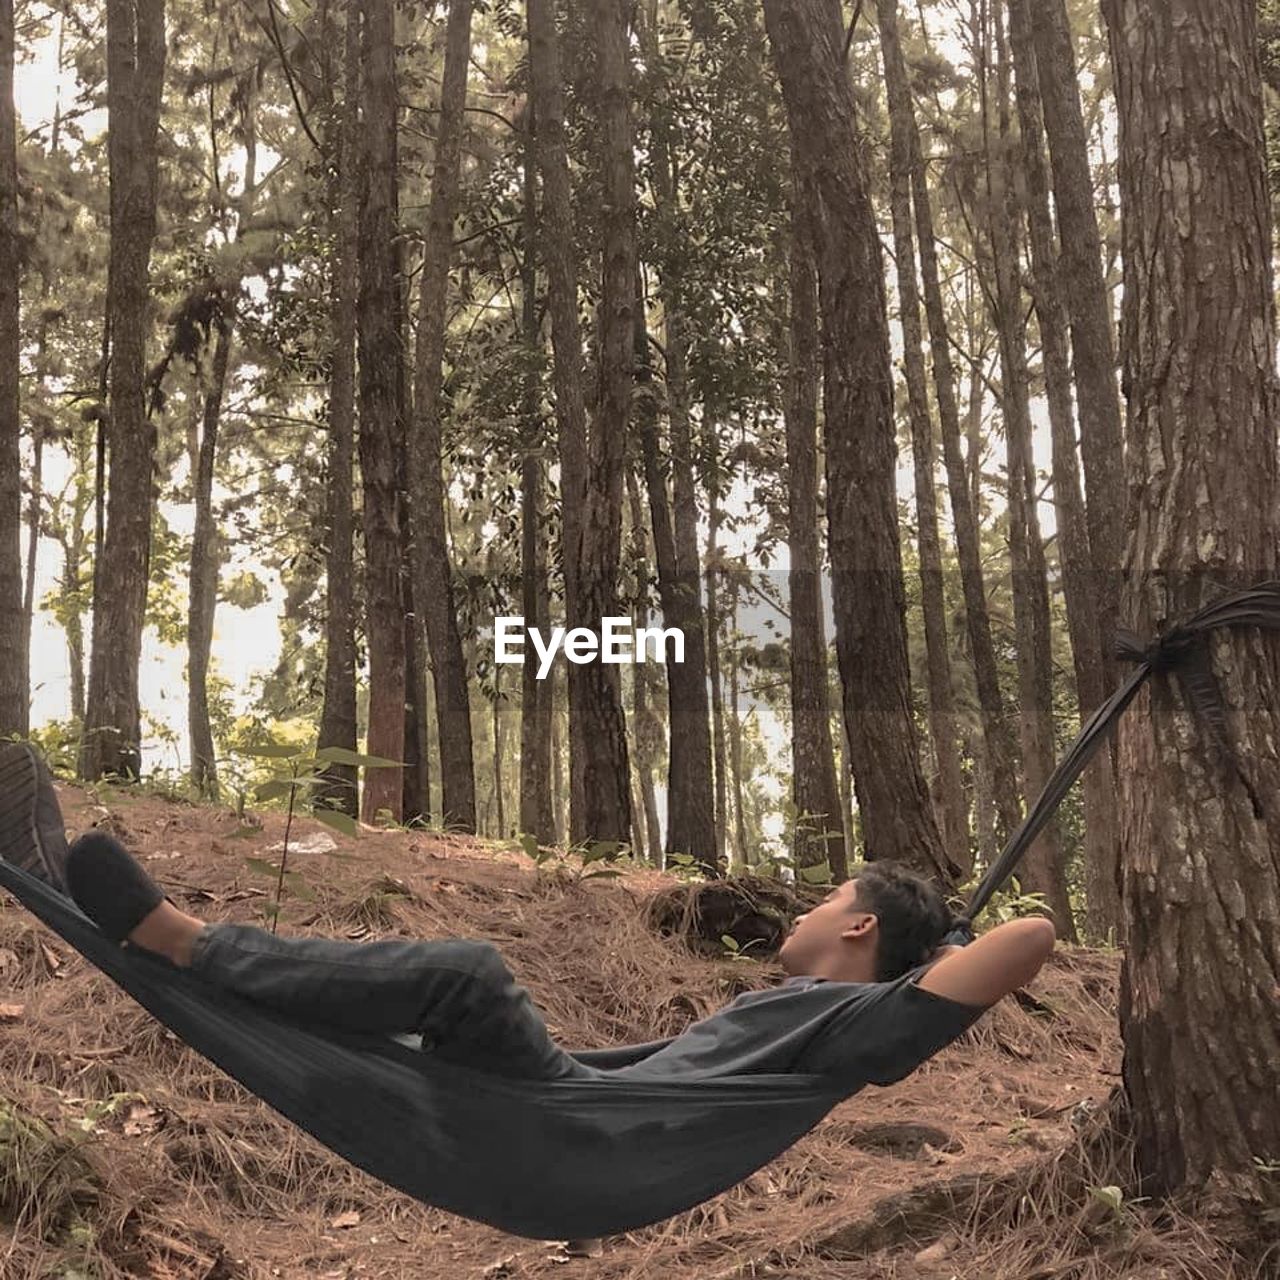 Man lying down on land against trees in forest